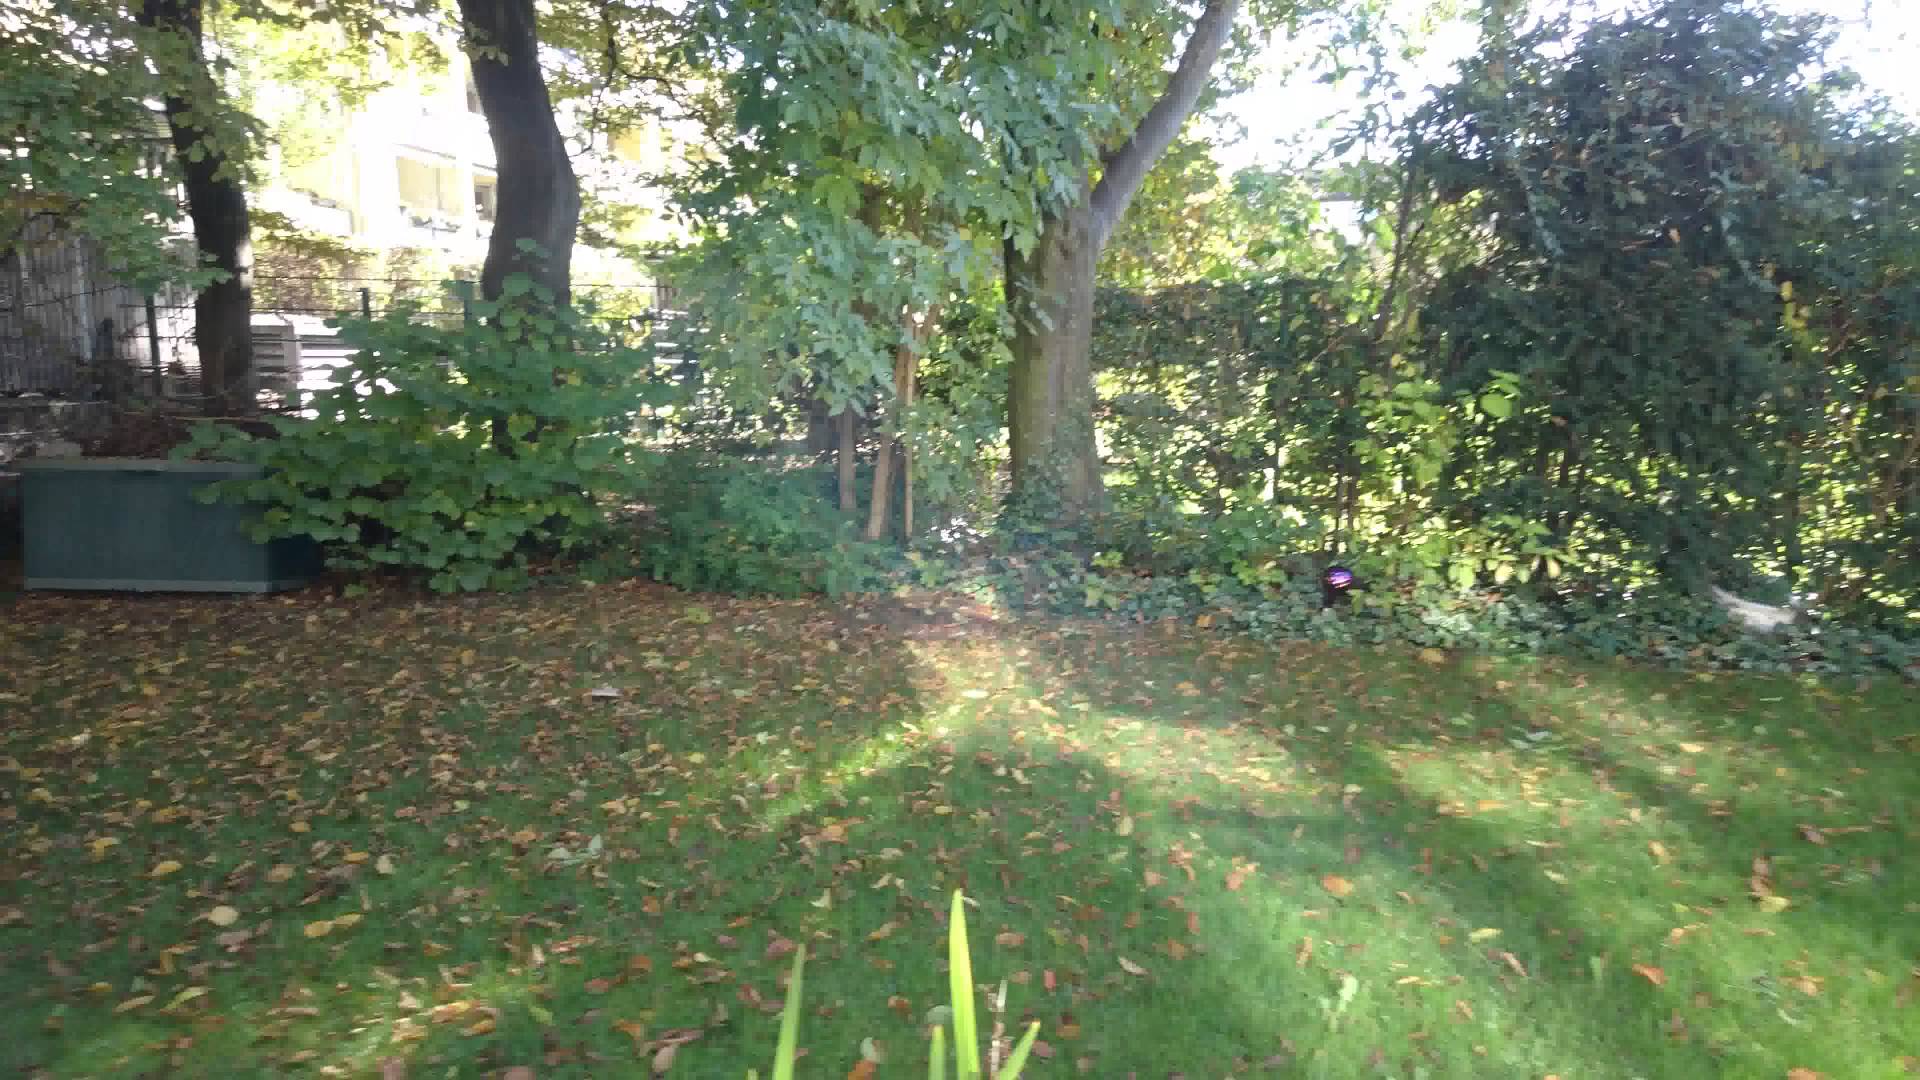 Sony Xperia Z3 Compact Back Camera 4K Video Test